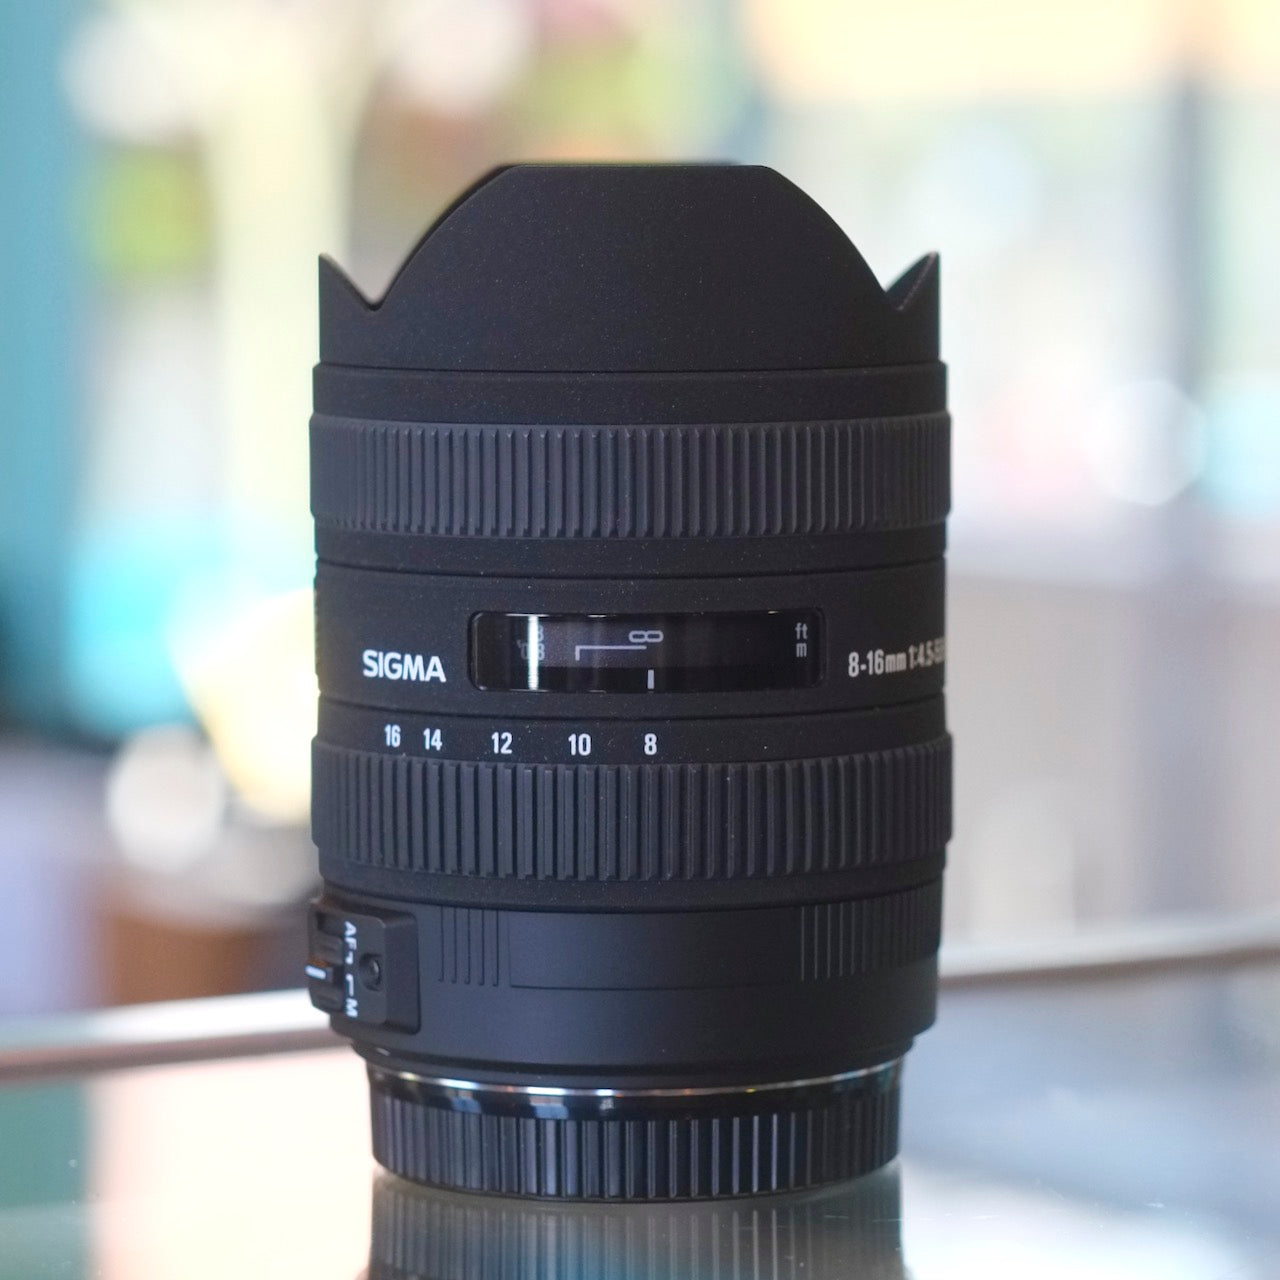 Sigma 8-16mm f4.5-5.6 DC HSM for Canon EF